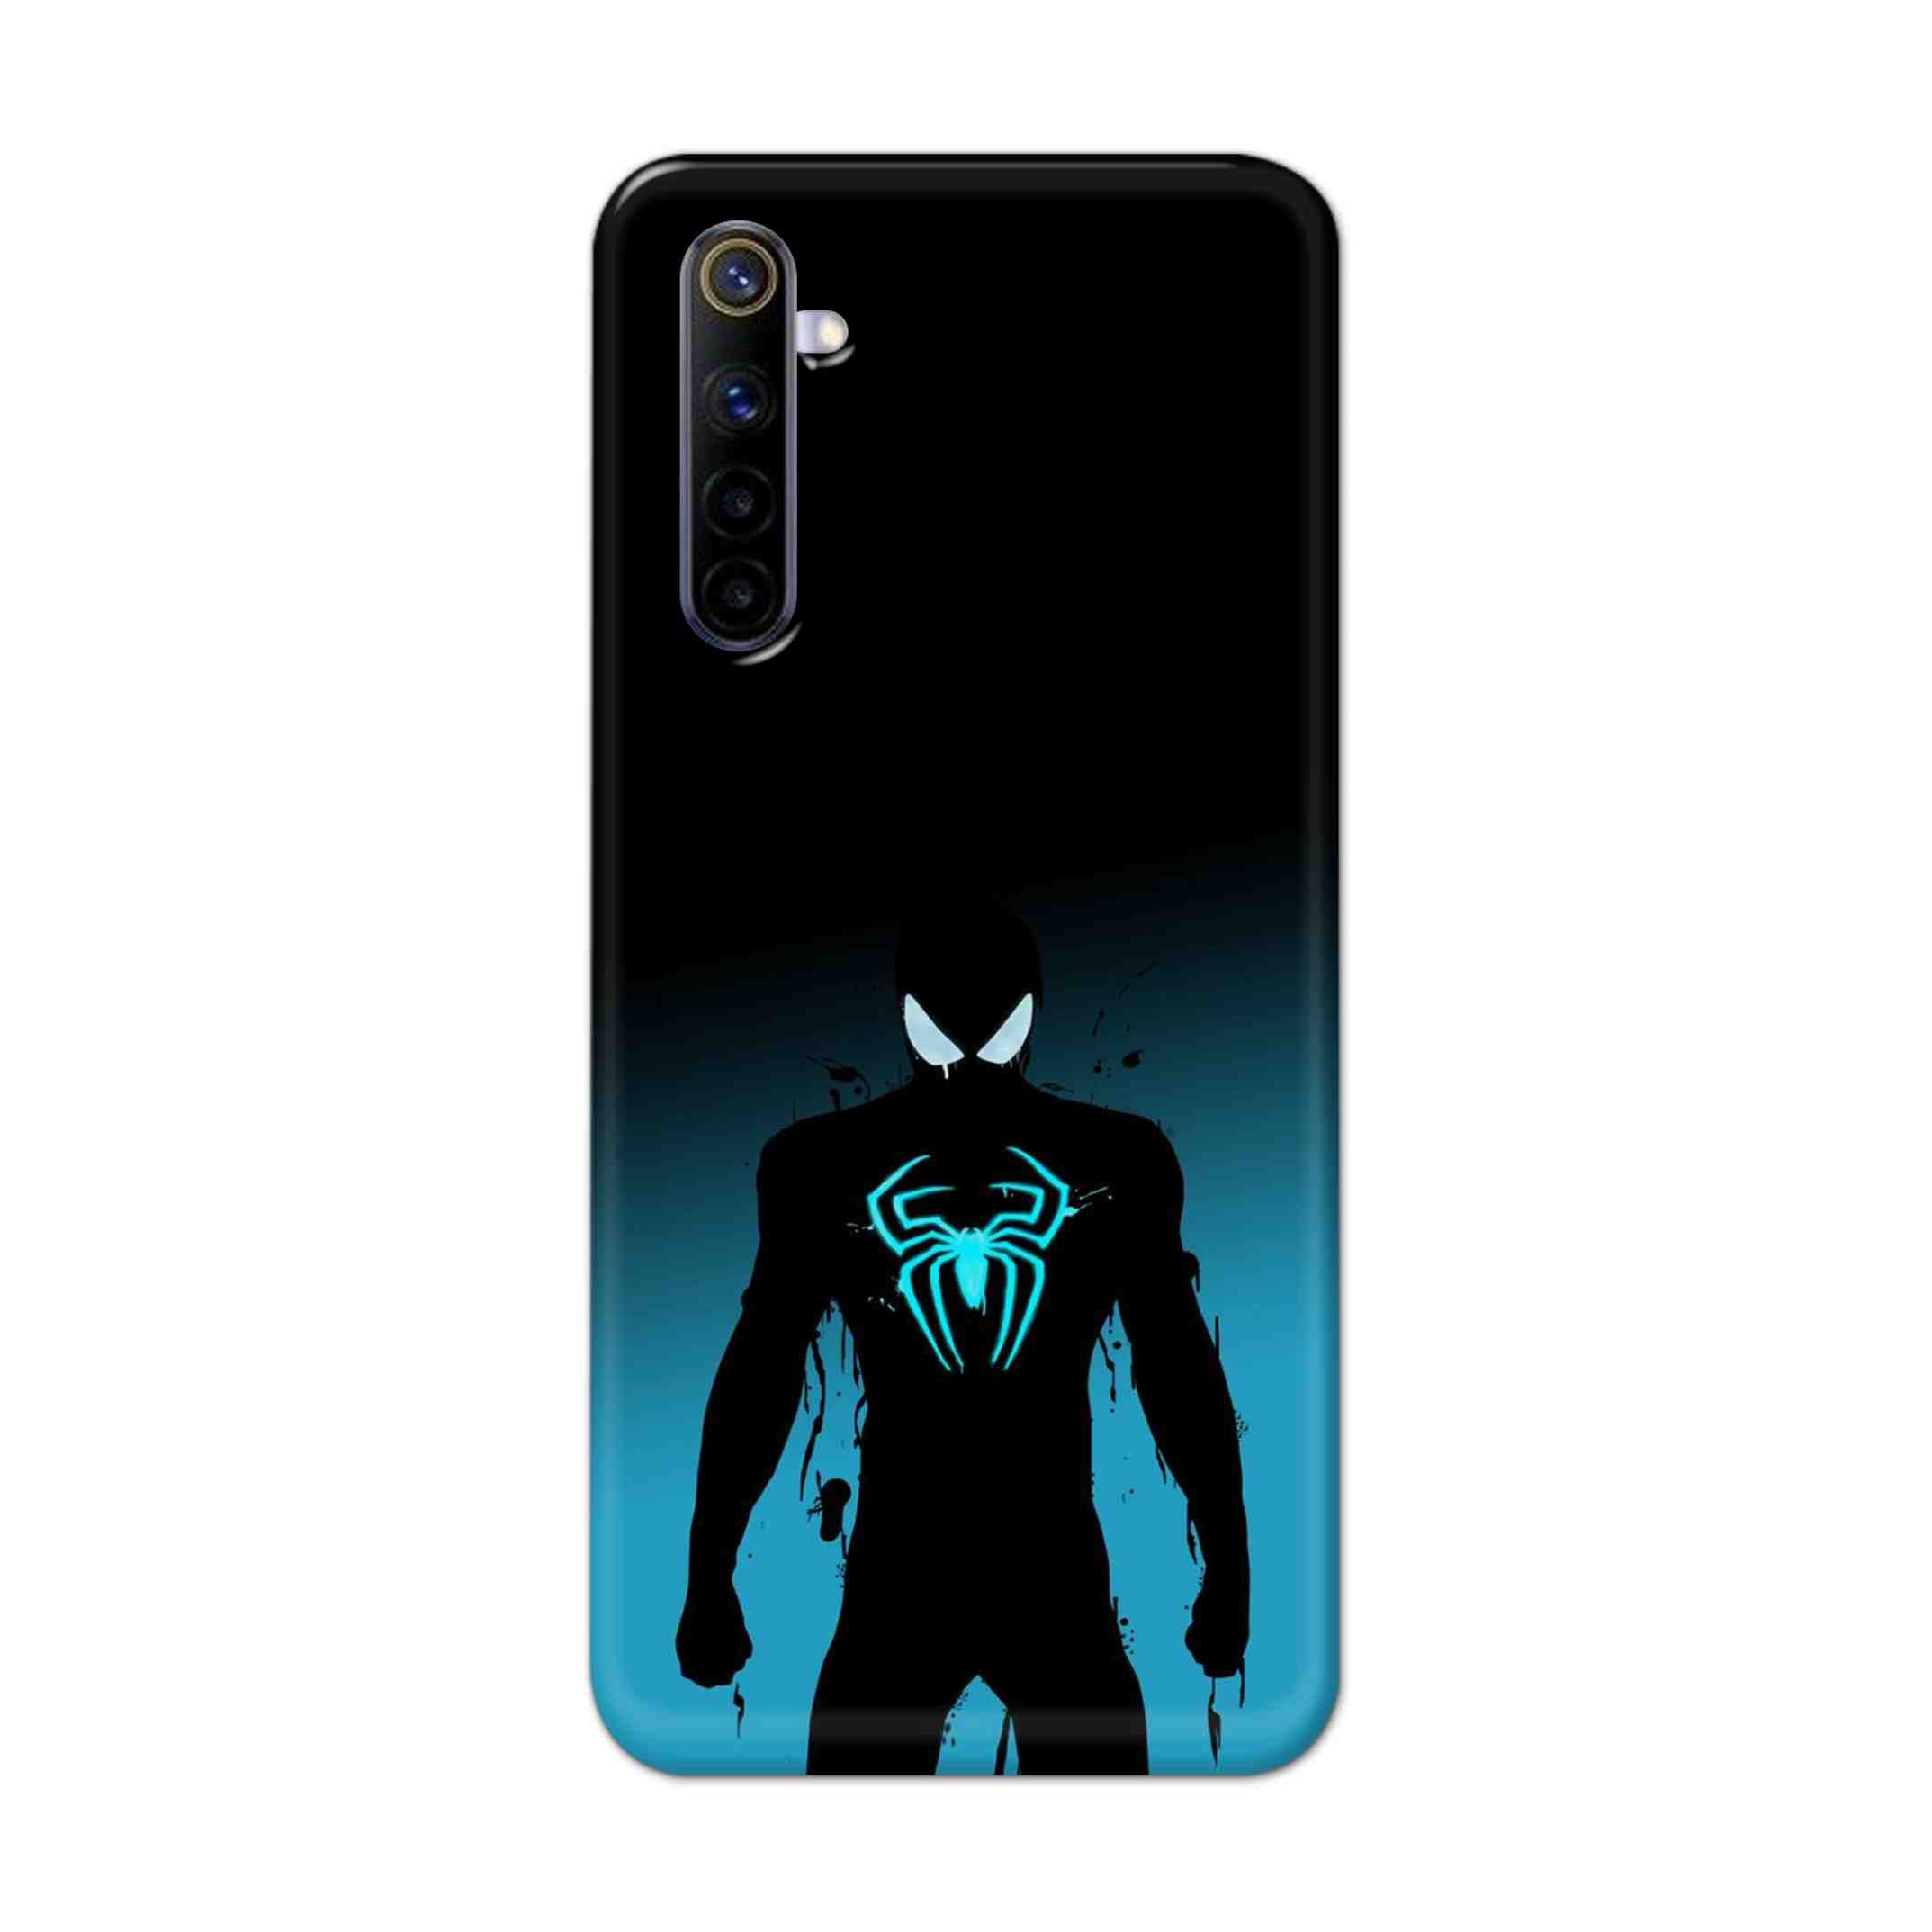 Buy Neon Spiderman Hard Back Mobile Phone Case Cover For REALME 6 PRO Online